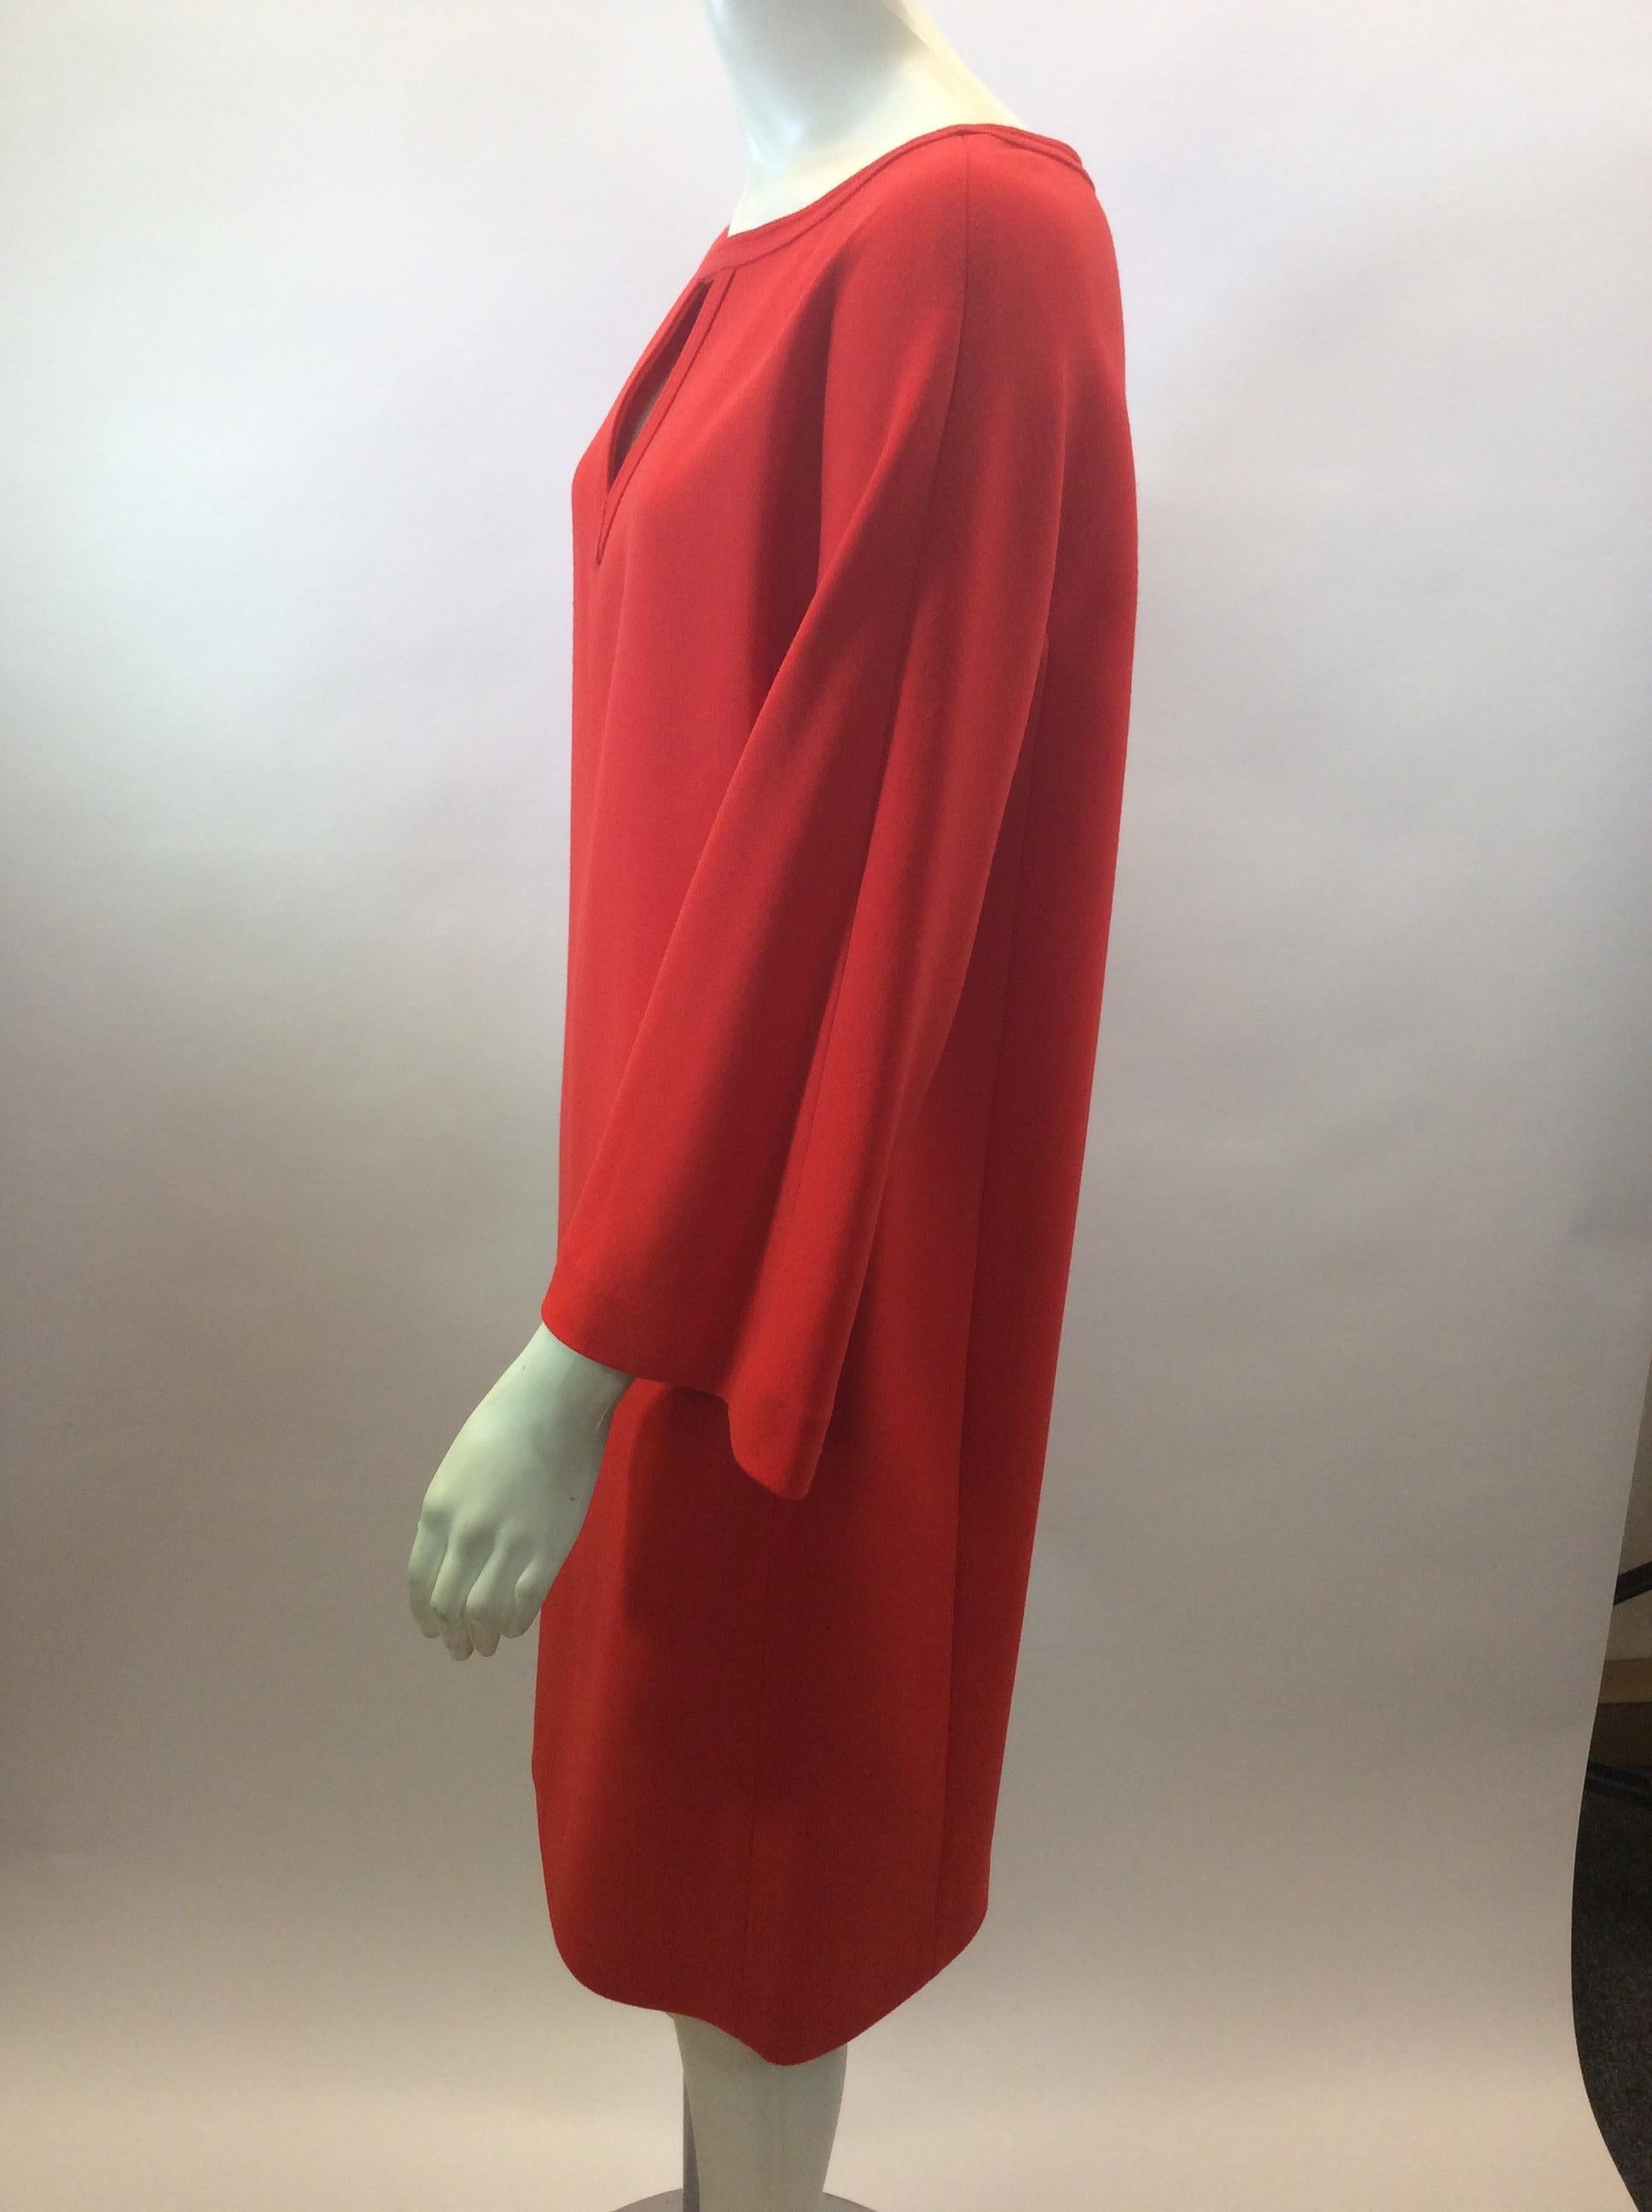 Charles Nolan Red Wool Dress
$299
Made in China
100% Wool
Size 6
Length 37